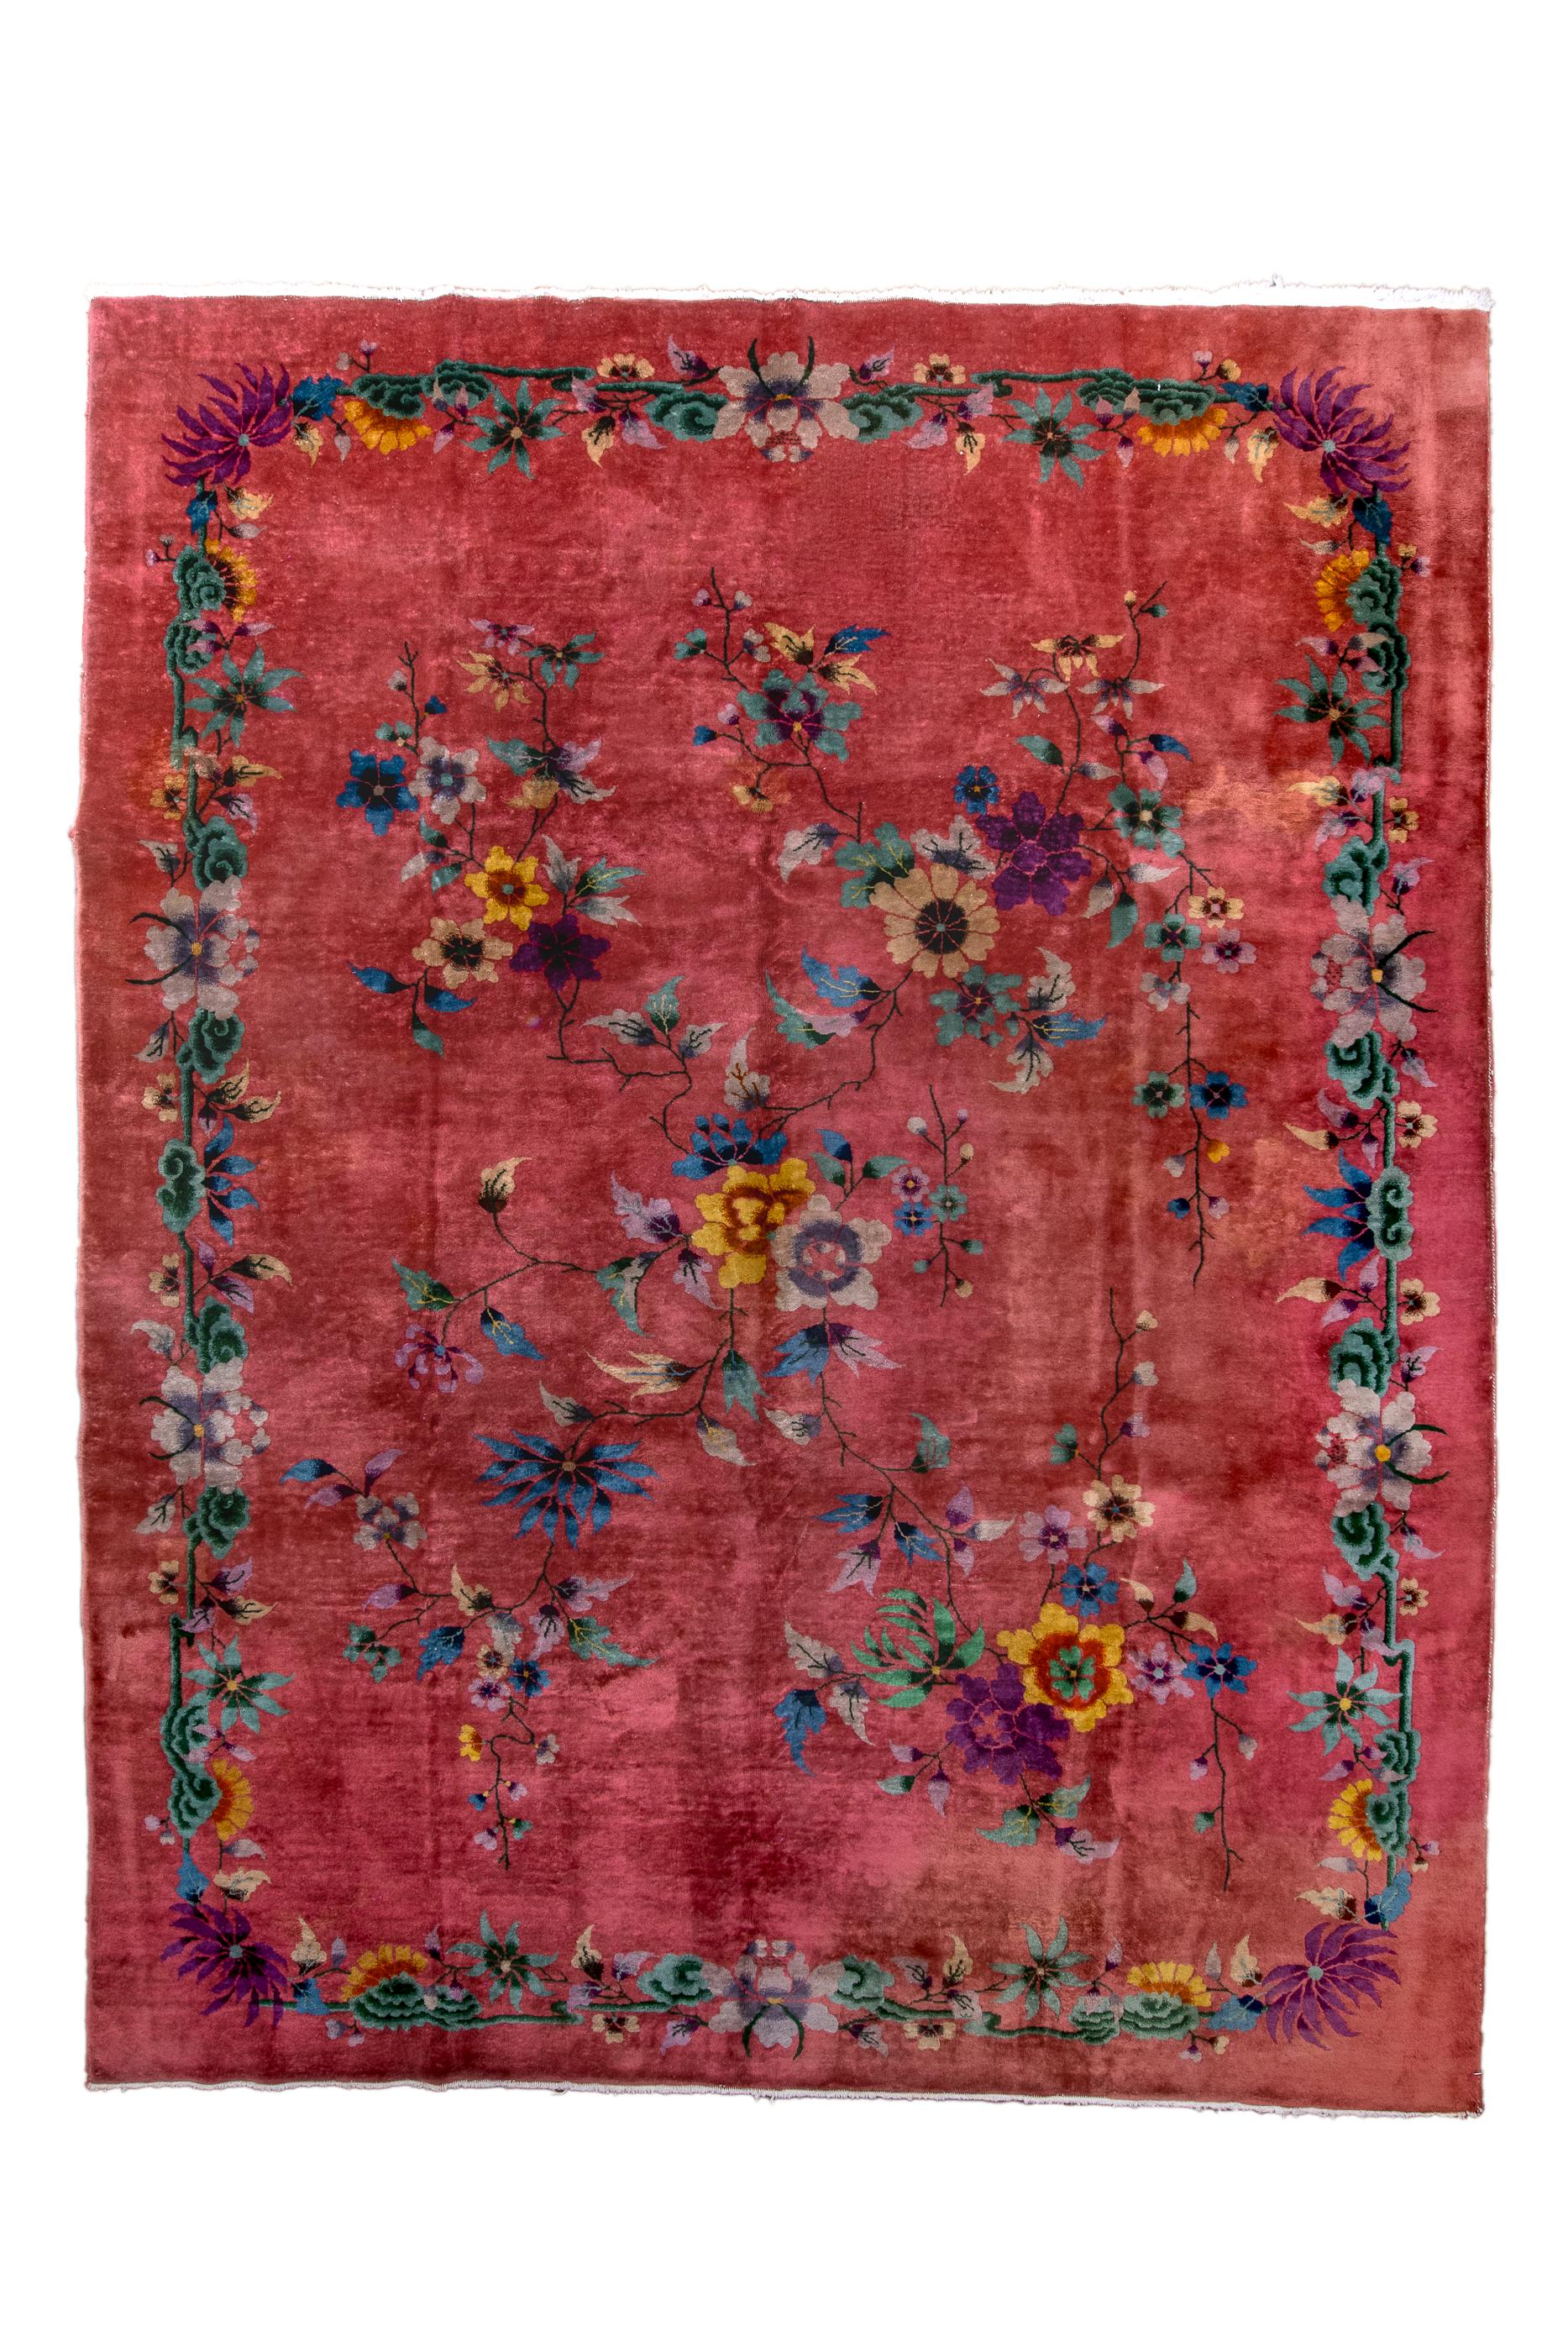 This bold Art Deco carpet from Tianjin (Tientsin) features a rose-tone ground, with an open floral trellis border, and en suite inner floral decorations of blossoms in canary yellow, cerulean blue, pale blue, teal and green, on black, wiry stalks. 